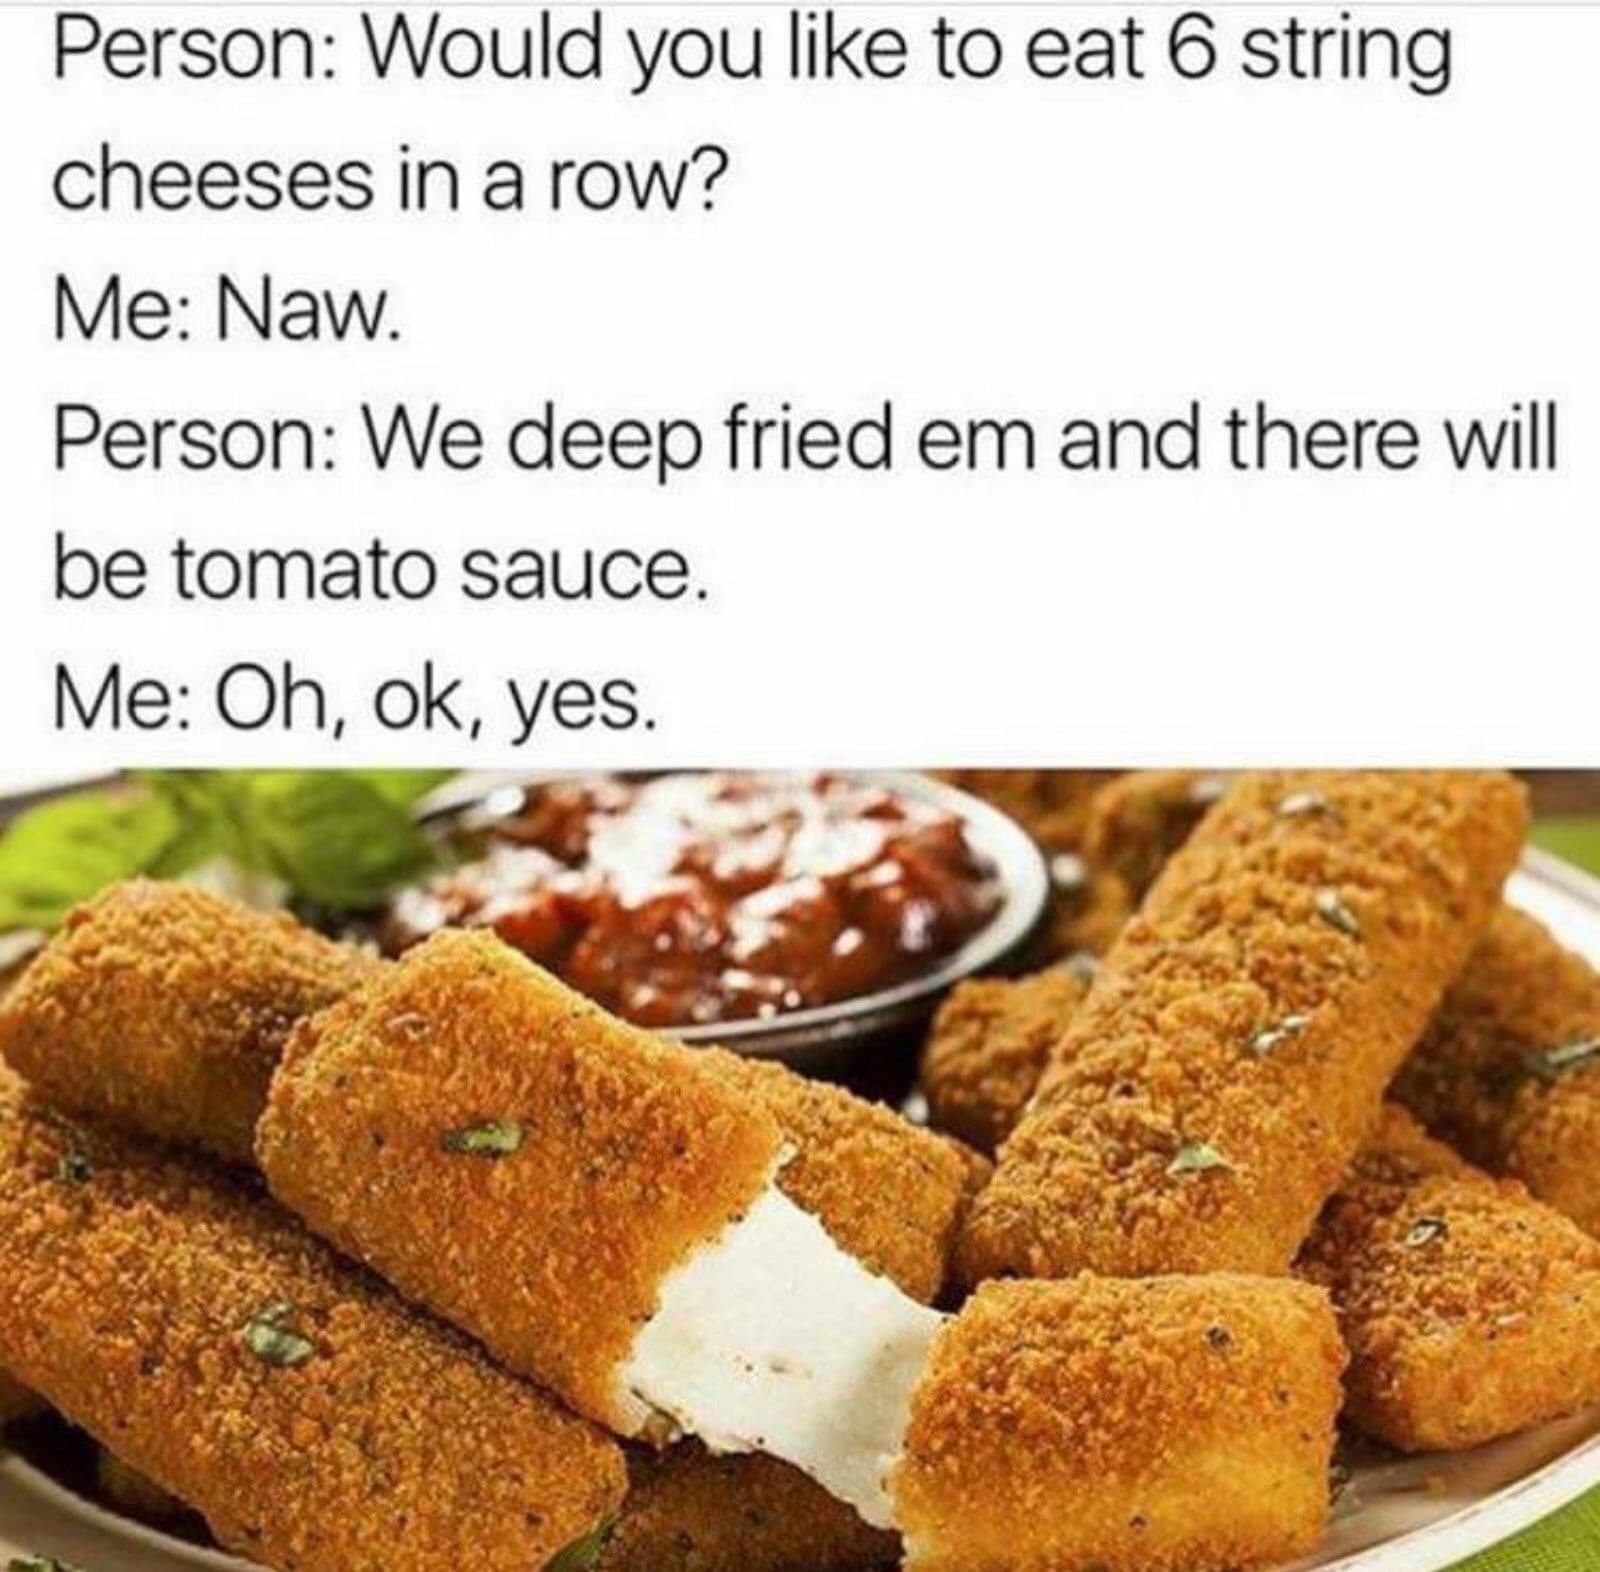 would you like to eat 6 string cheese - Person Would you to eat 6 string cheeses in a row? Me Naw. Person We deep fried em and there will be tomato sauce. Me Oh, ok, yes.